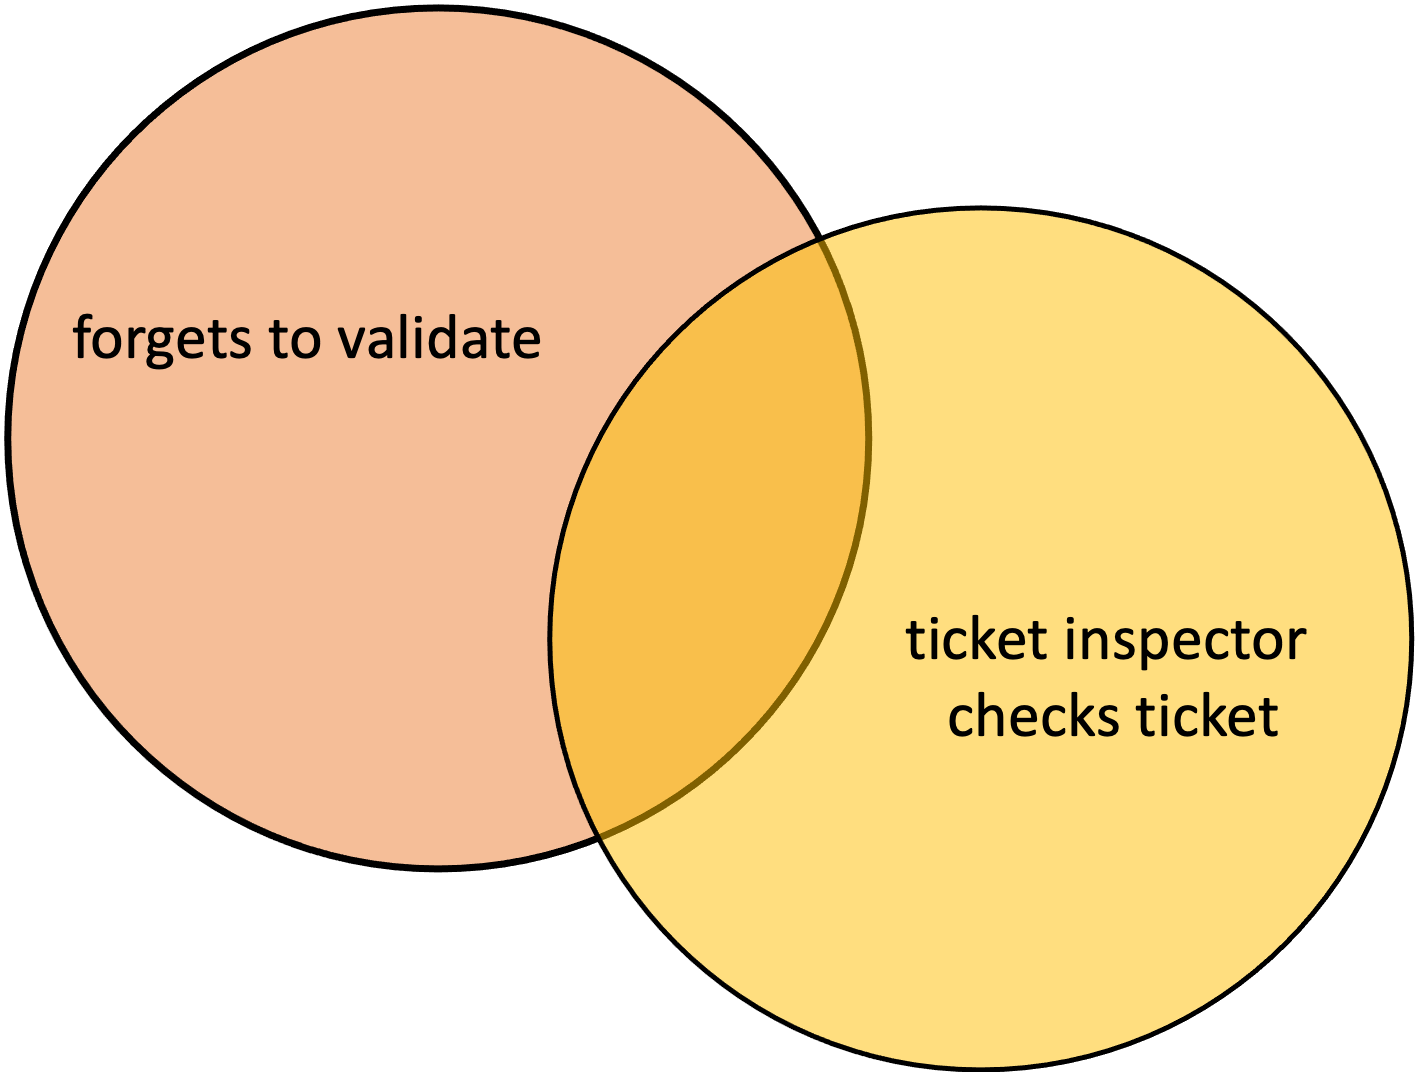 venn diagram - forgets to validate in 1 circle, ticket inspector checks ticket in the other circle